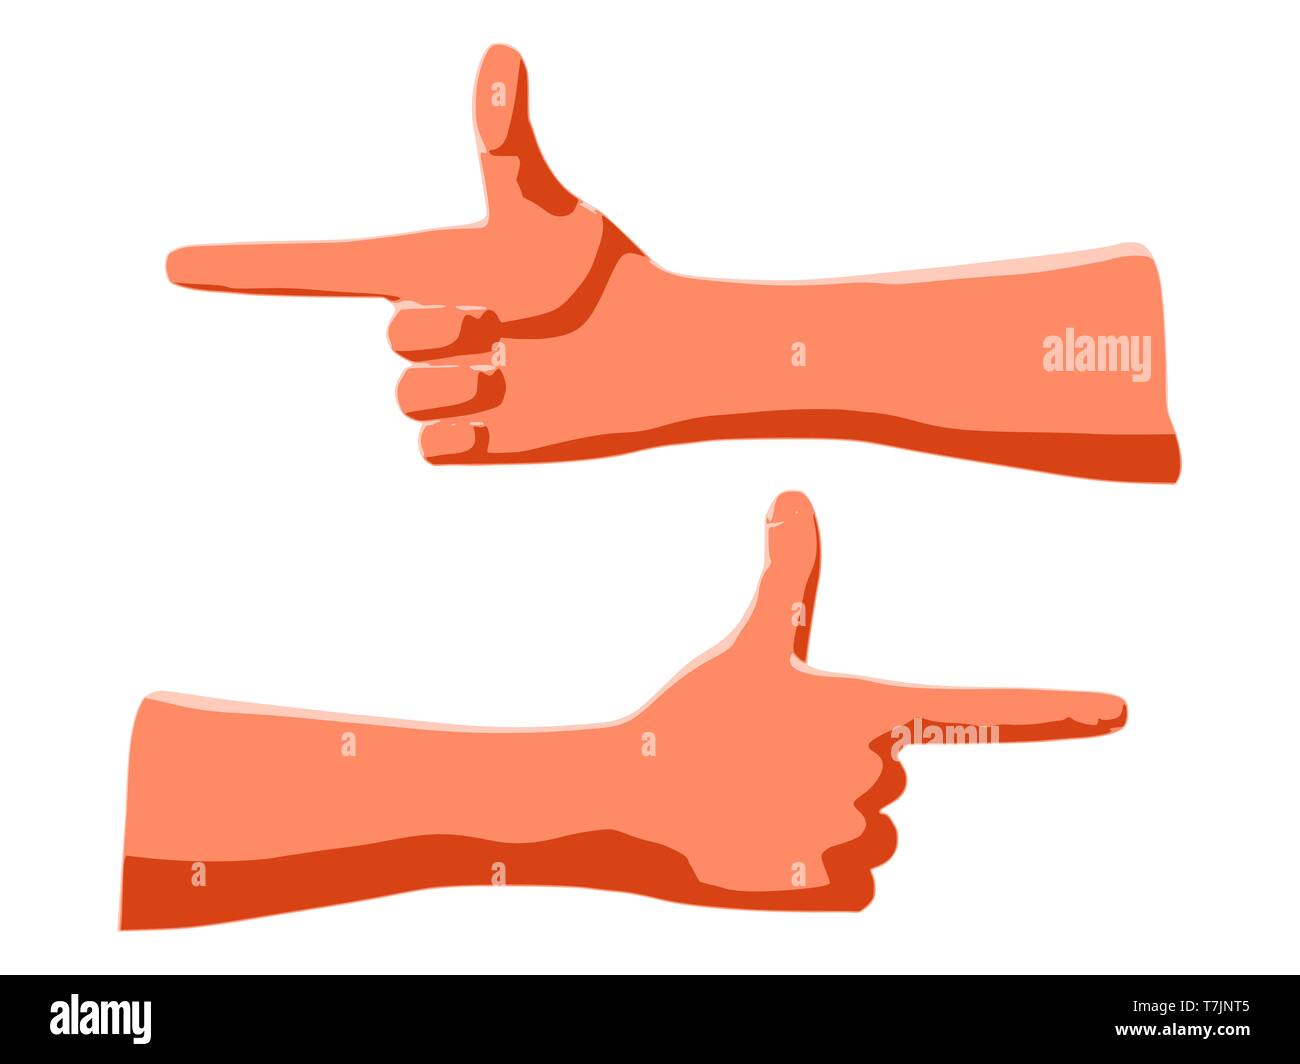 File:Index finger = attention.JPG - Wikimedia Commons